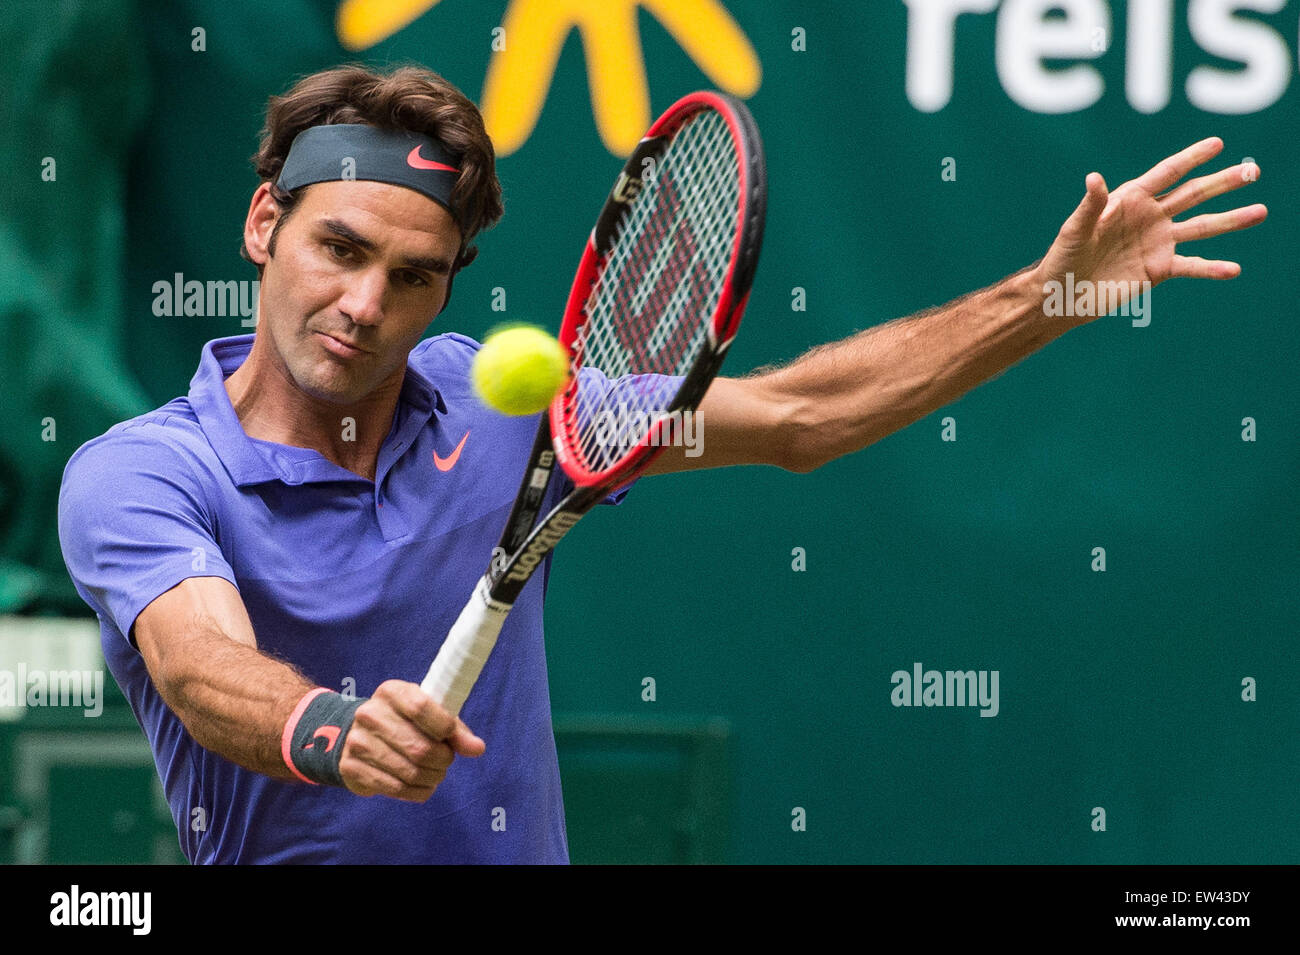 Halle, Germany. 17th June, 2015. Roger Federer of Switzerland in action during the round of 16 match against Gulbis of Latvia at the ATP tennis tournament in Halle, Germany, 17 June 2015. Photo: MAJA HITIJ/dpa/Alamy Live News Stock Photo